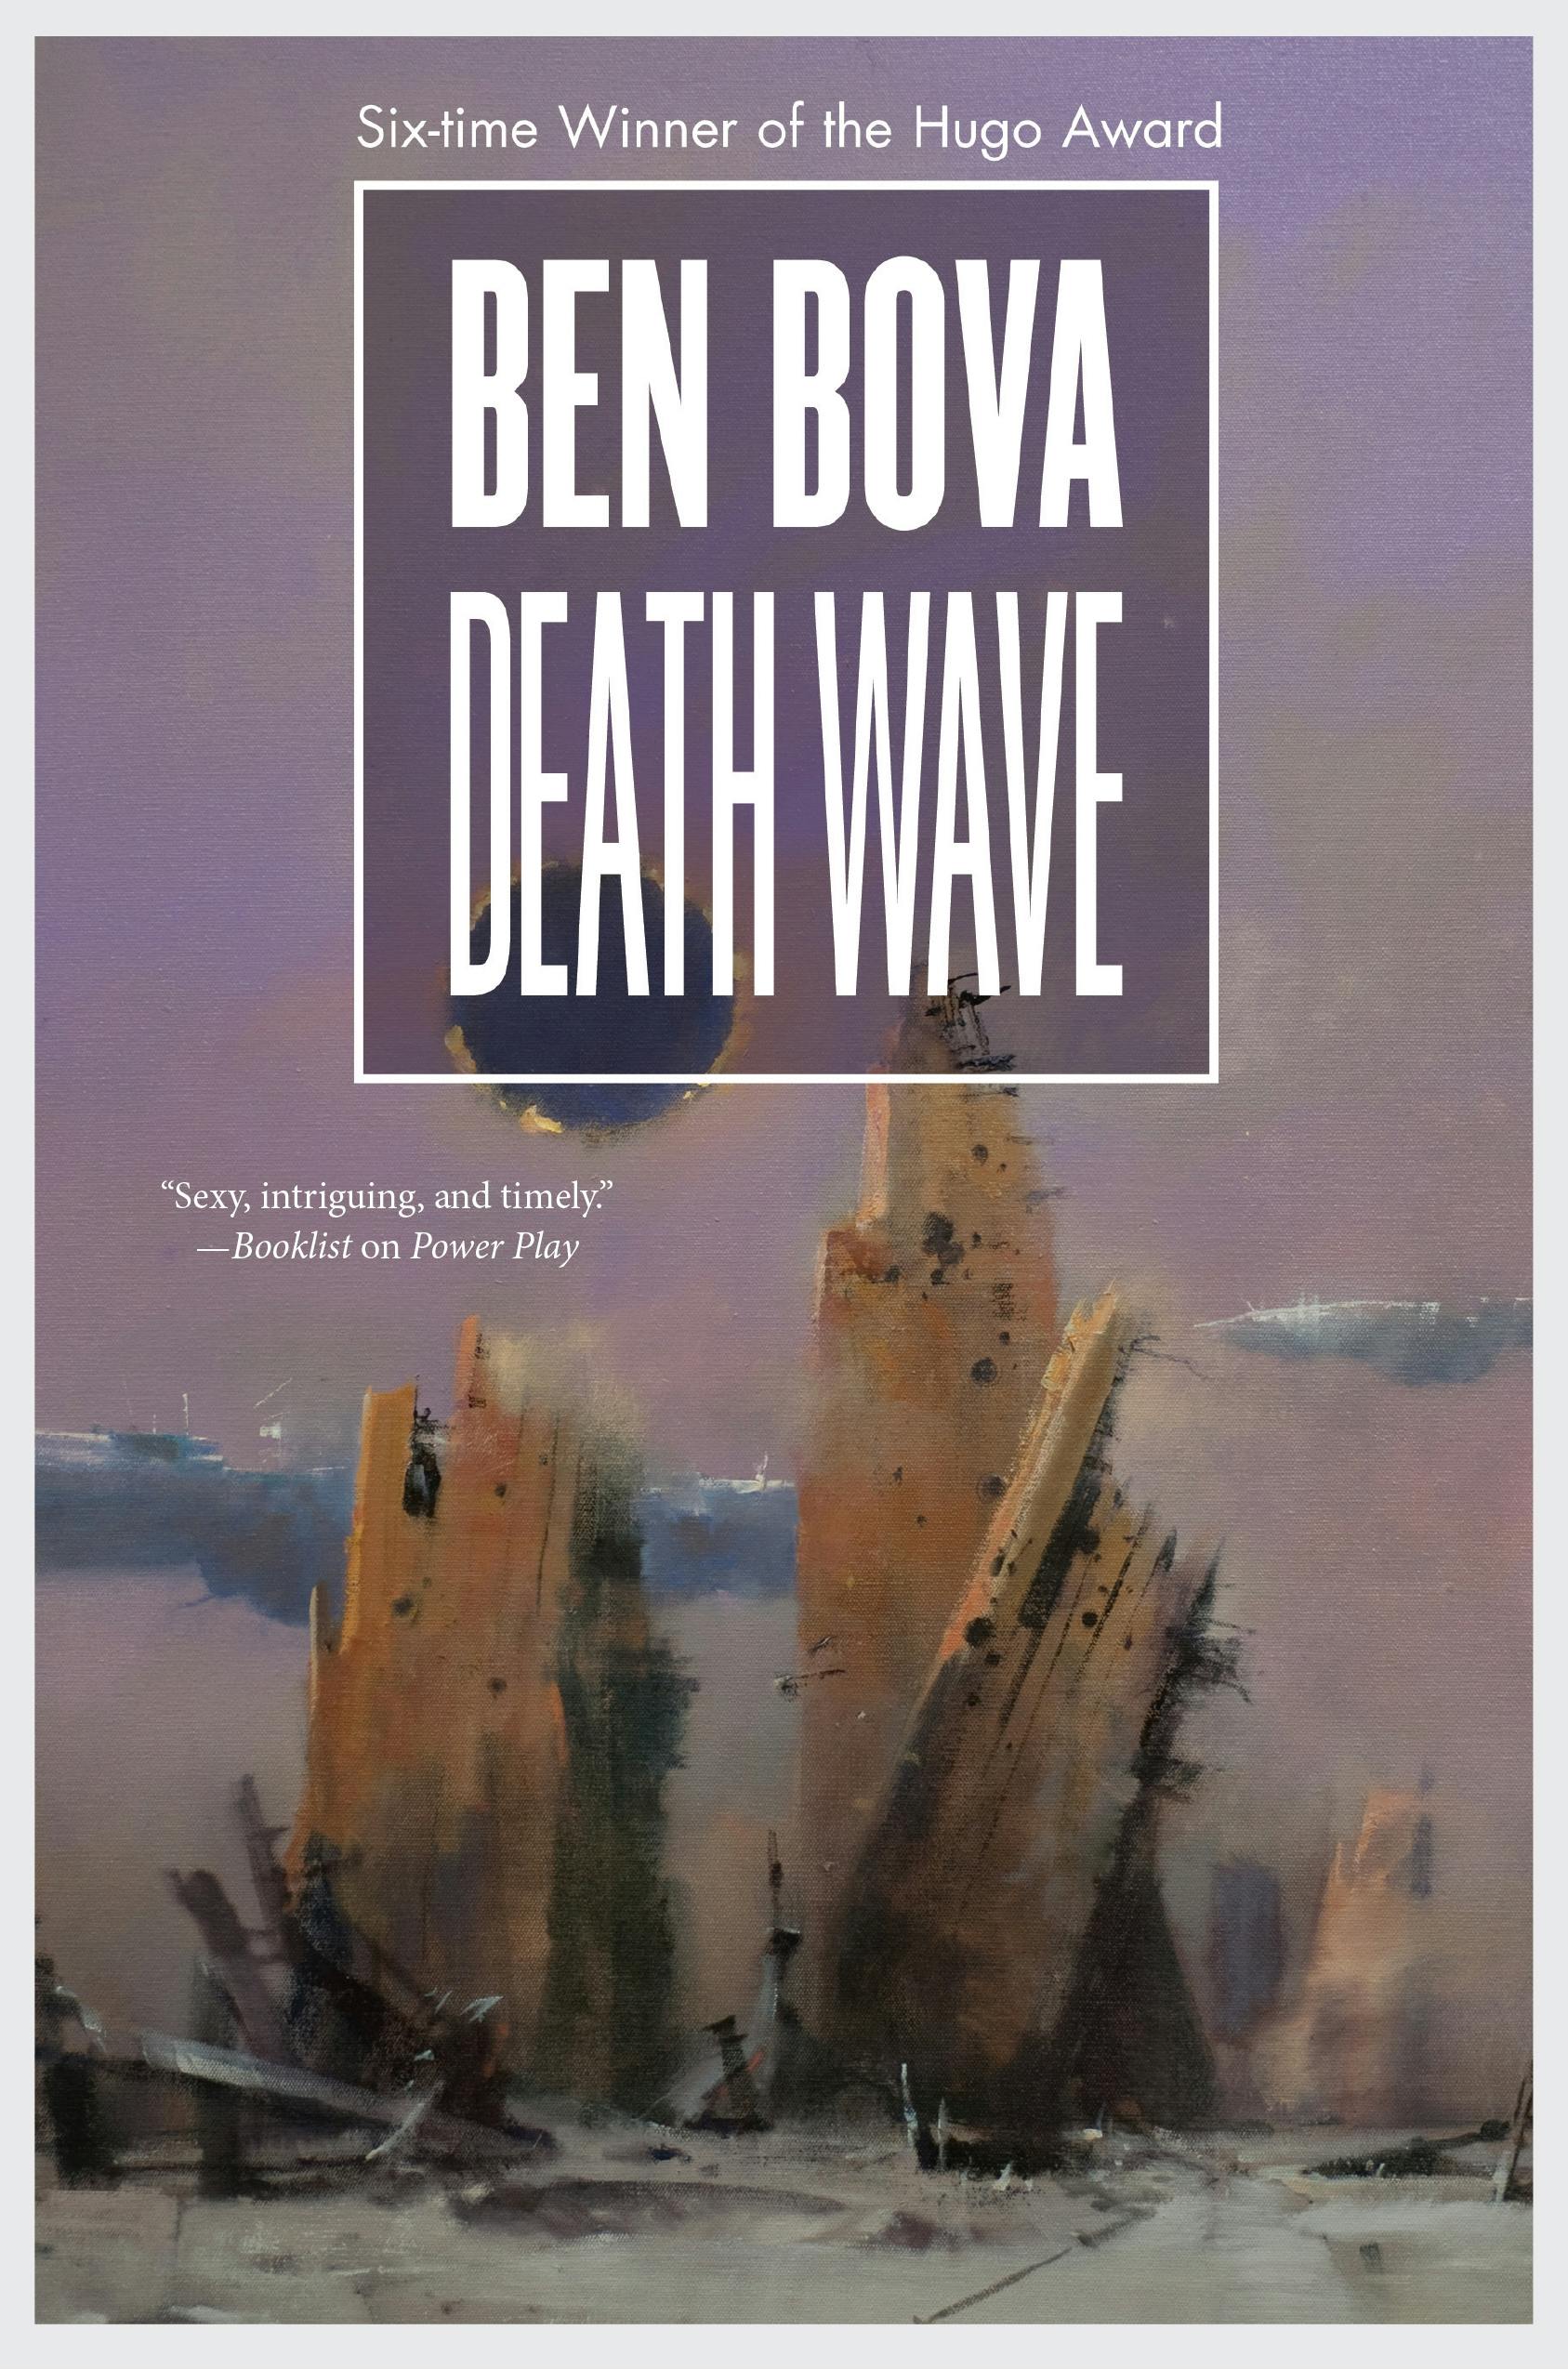 Cover for the book titled as: Death Wave